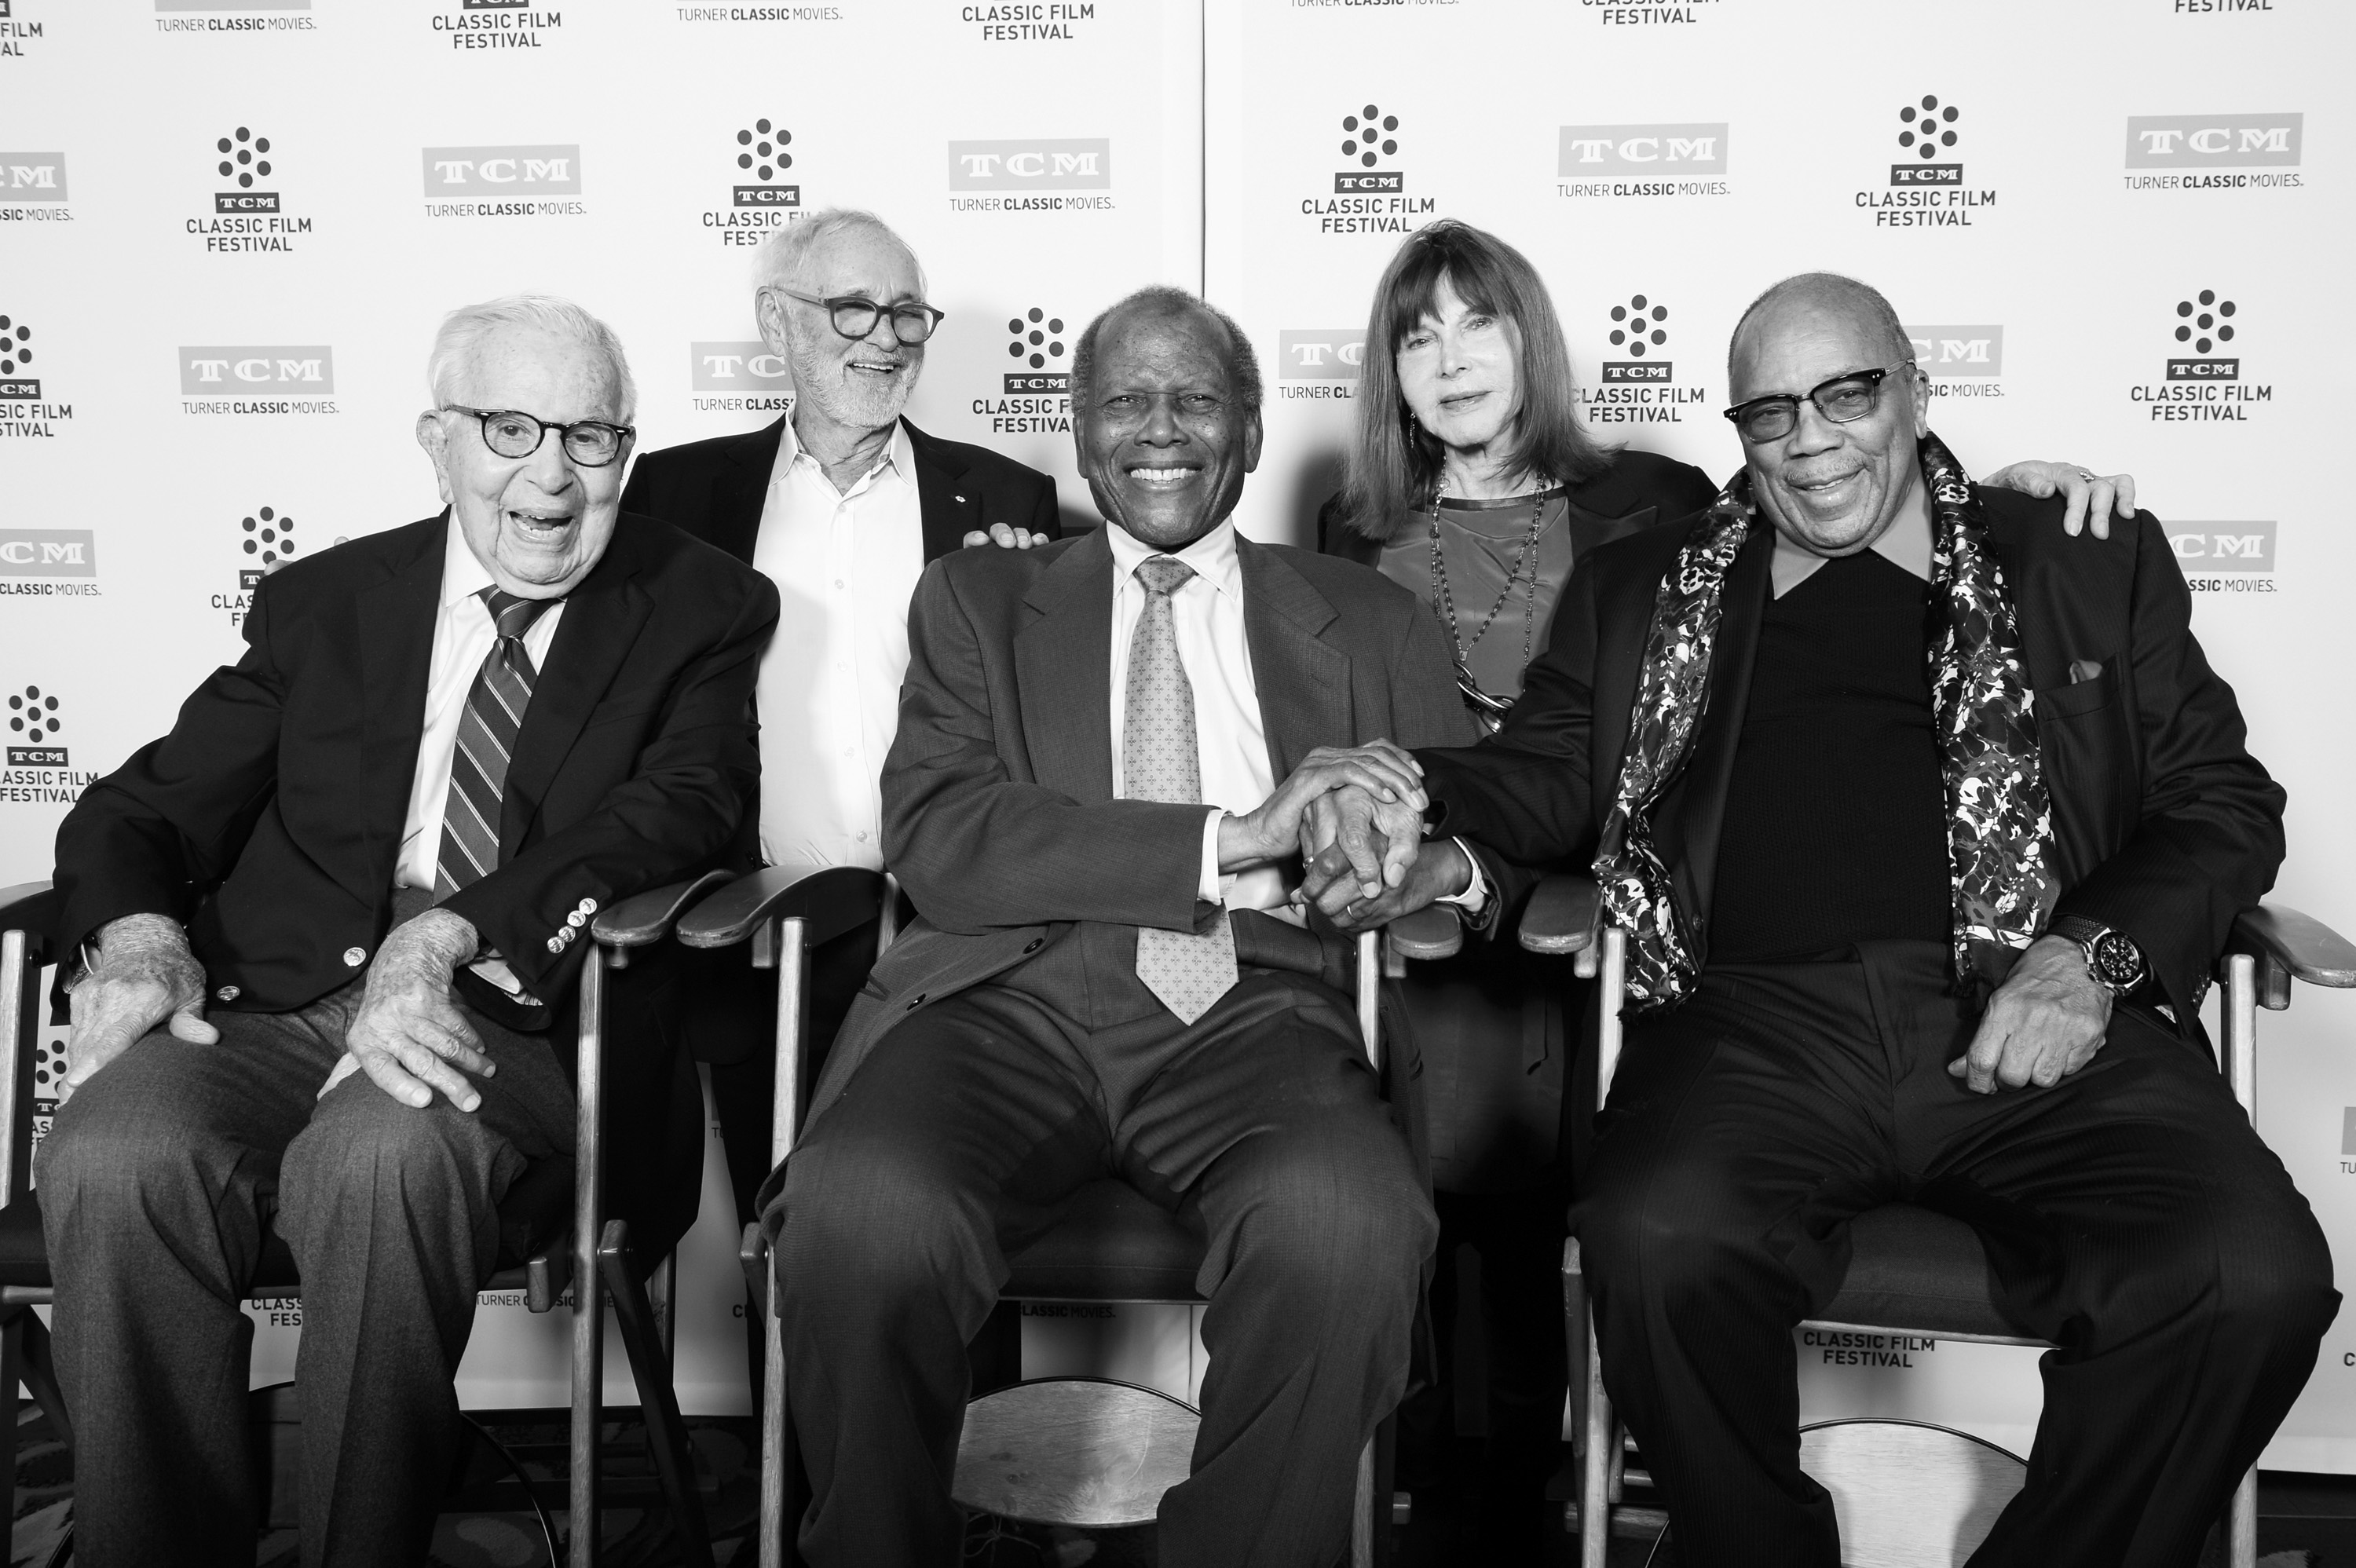 LOS ANGELES, CA - APRIL 06: (EDITOR'S NOTE: Image has been converted to black and white.) (L-R) Producer Walter Mirisch, director Norman Jewison, actor Sidney Poitier, actor Lee Grant and producer Quincy Jones attend the 50th anniversary screening of 'In the Heat of the Night' during the 2017 TCM Classic Film Festival on April 6, 2017 in Los Angeles, California. (Photo by Handout/Getty Images)